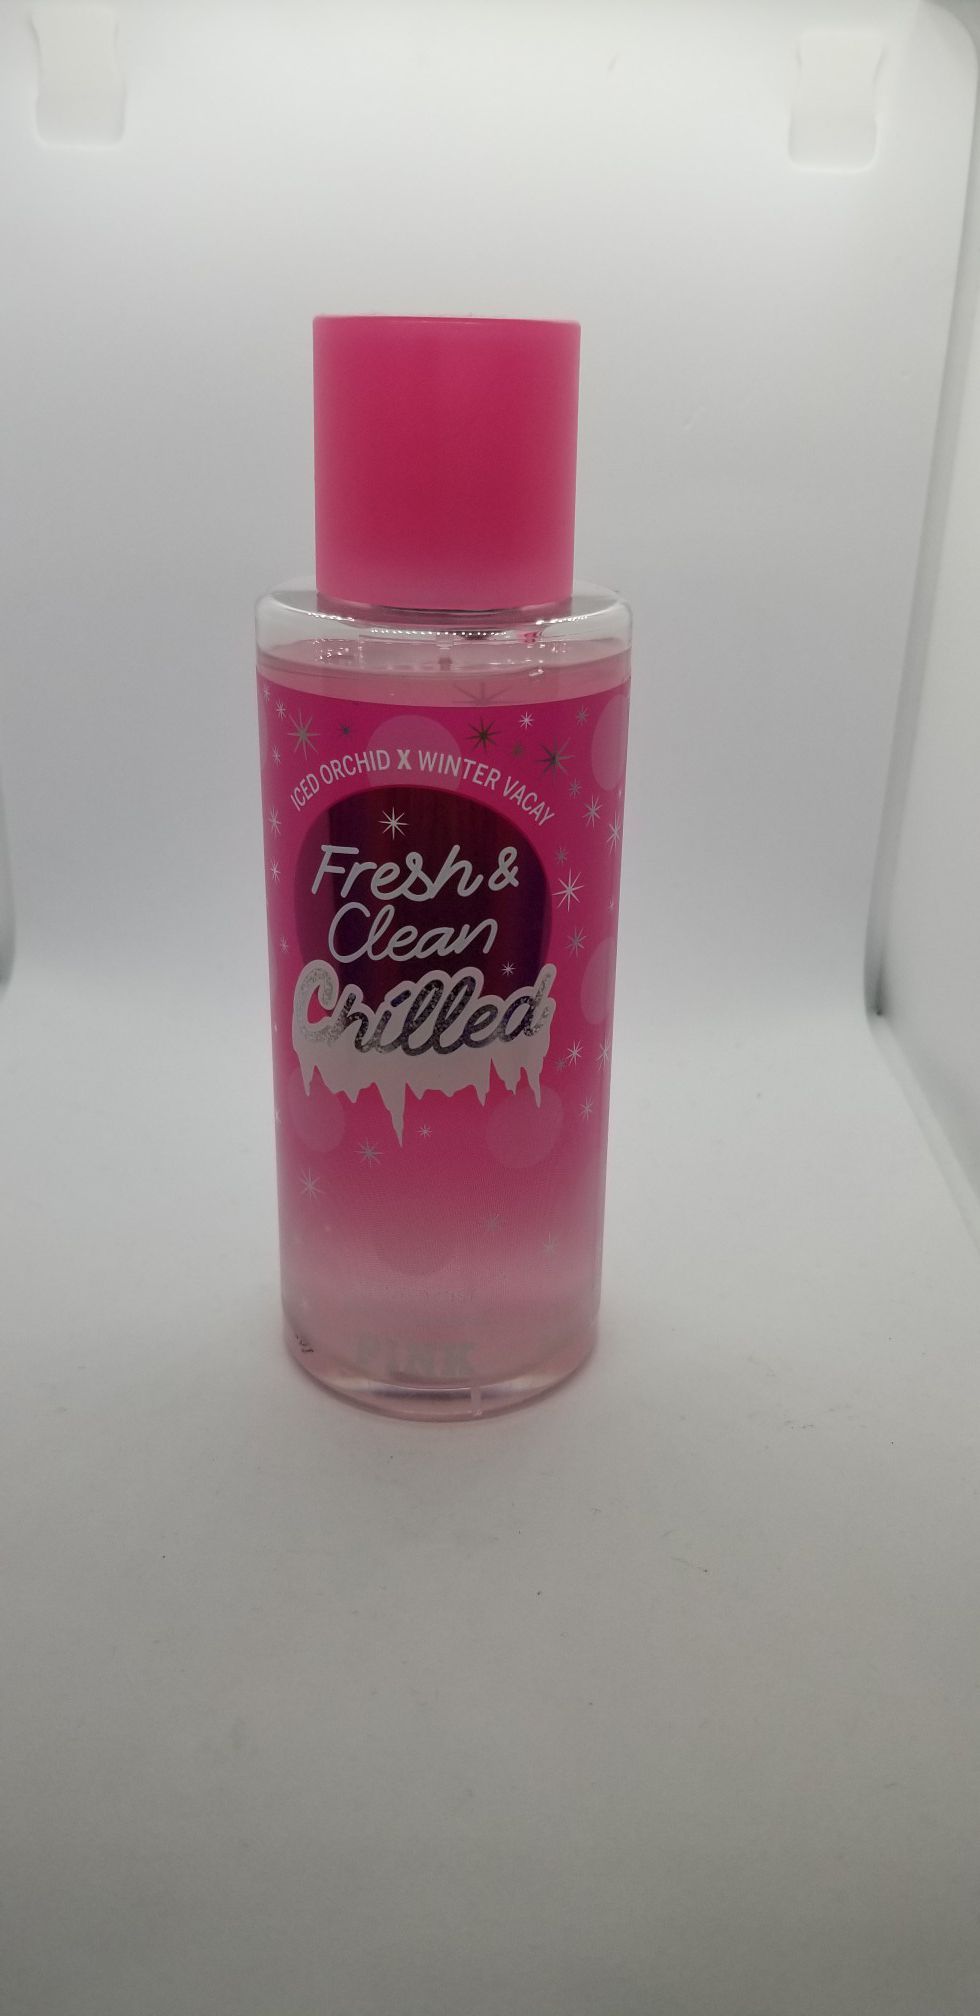 Vs pink fresh and clean chilled